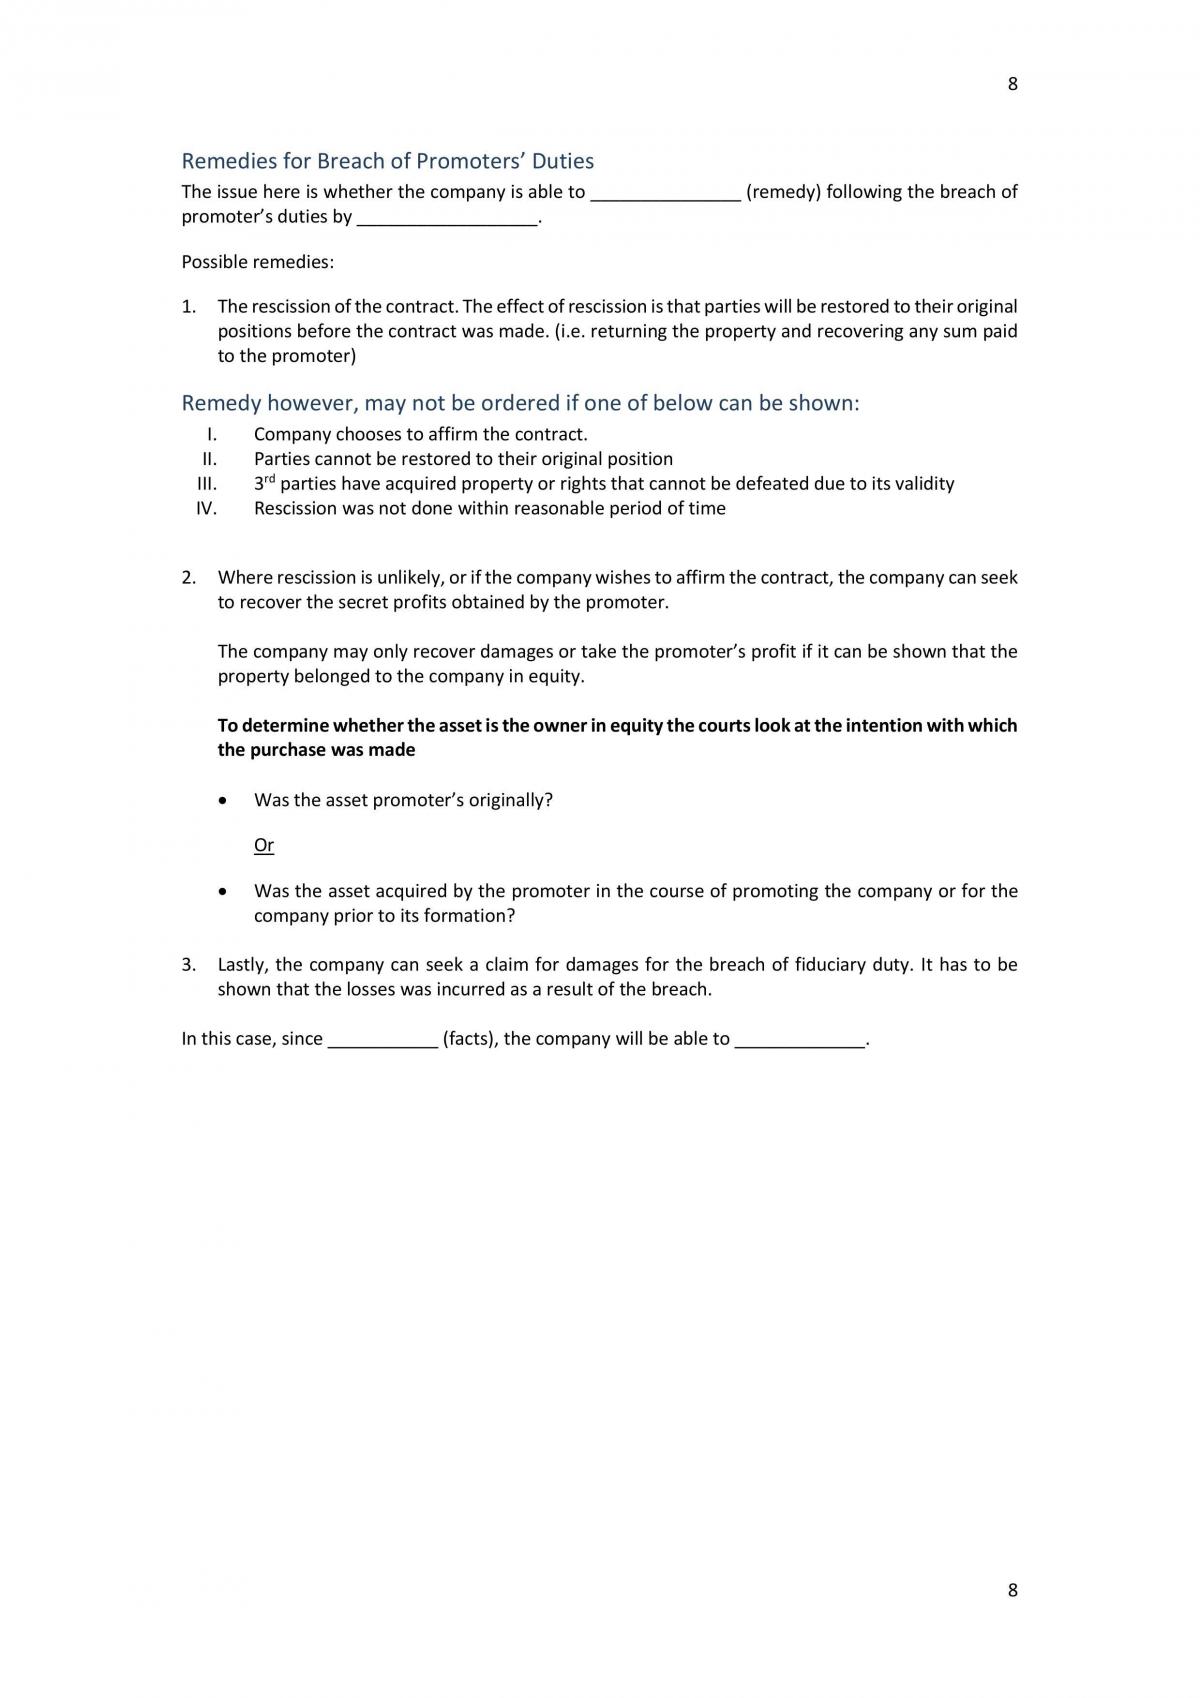 AC3203 Company Law and Corp Governance full notes - Page 8